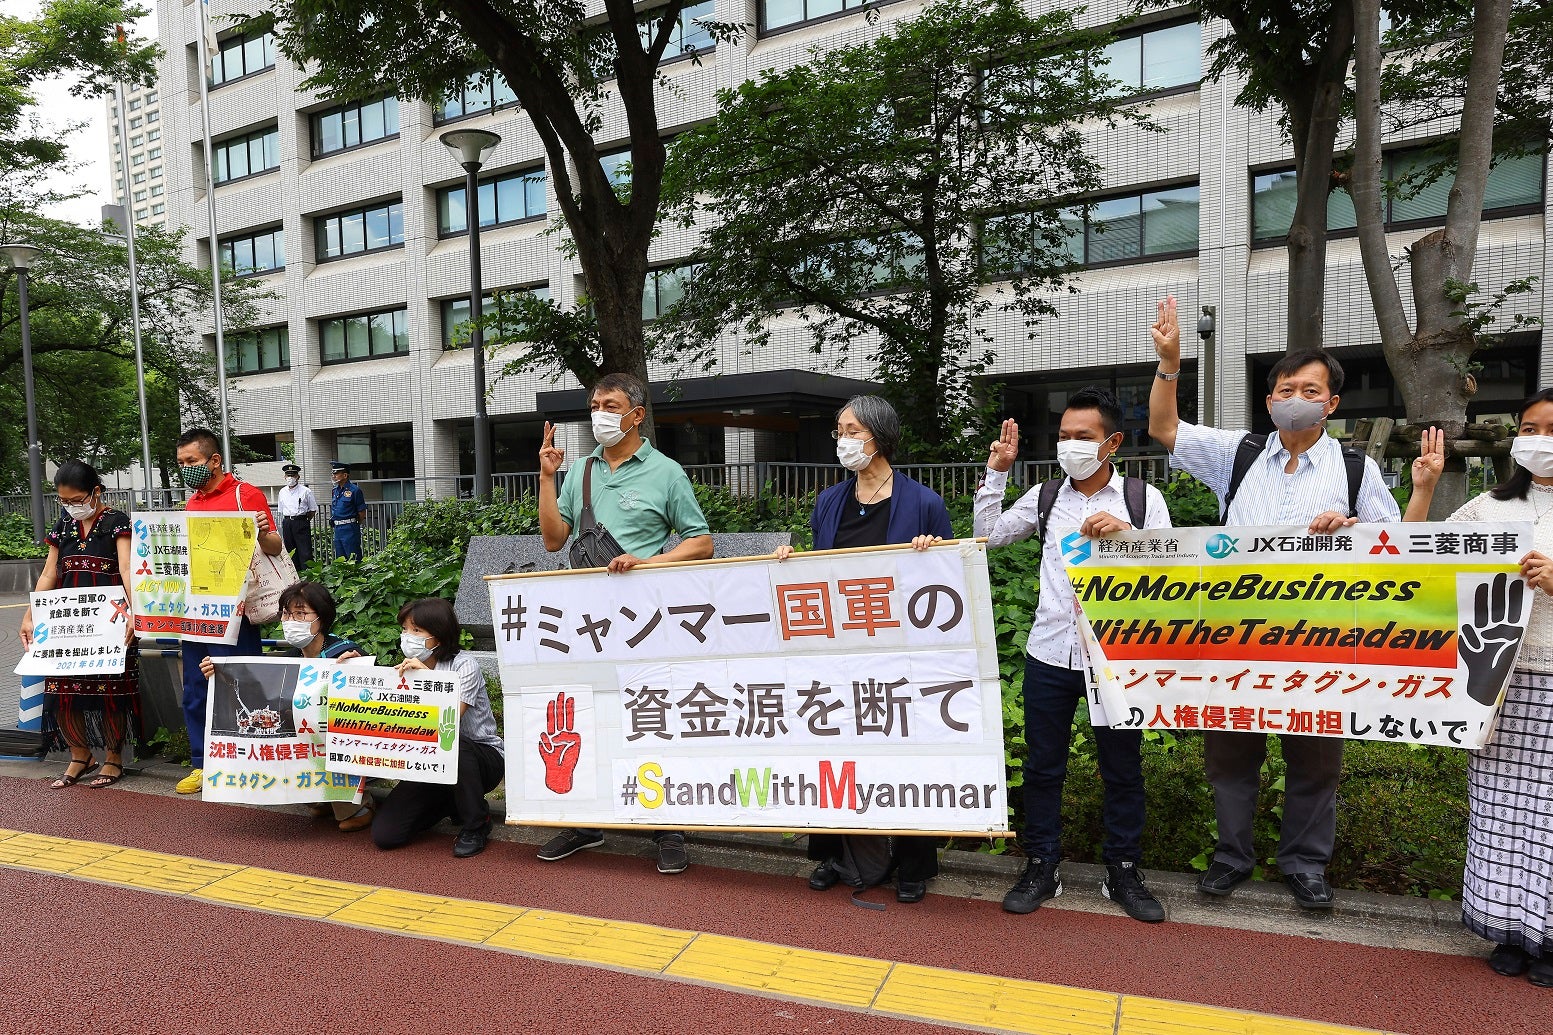 Activists demonstrate in front of the Ministry of Economy, Trade and Industry in Tokyo to cut off funding for Myanmar's national army on June 18, 2021 in Tokyo, Japan. 